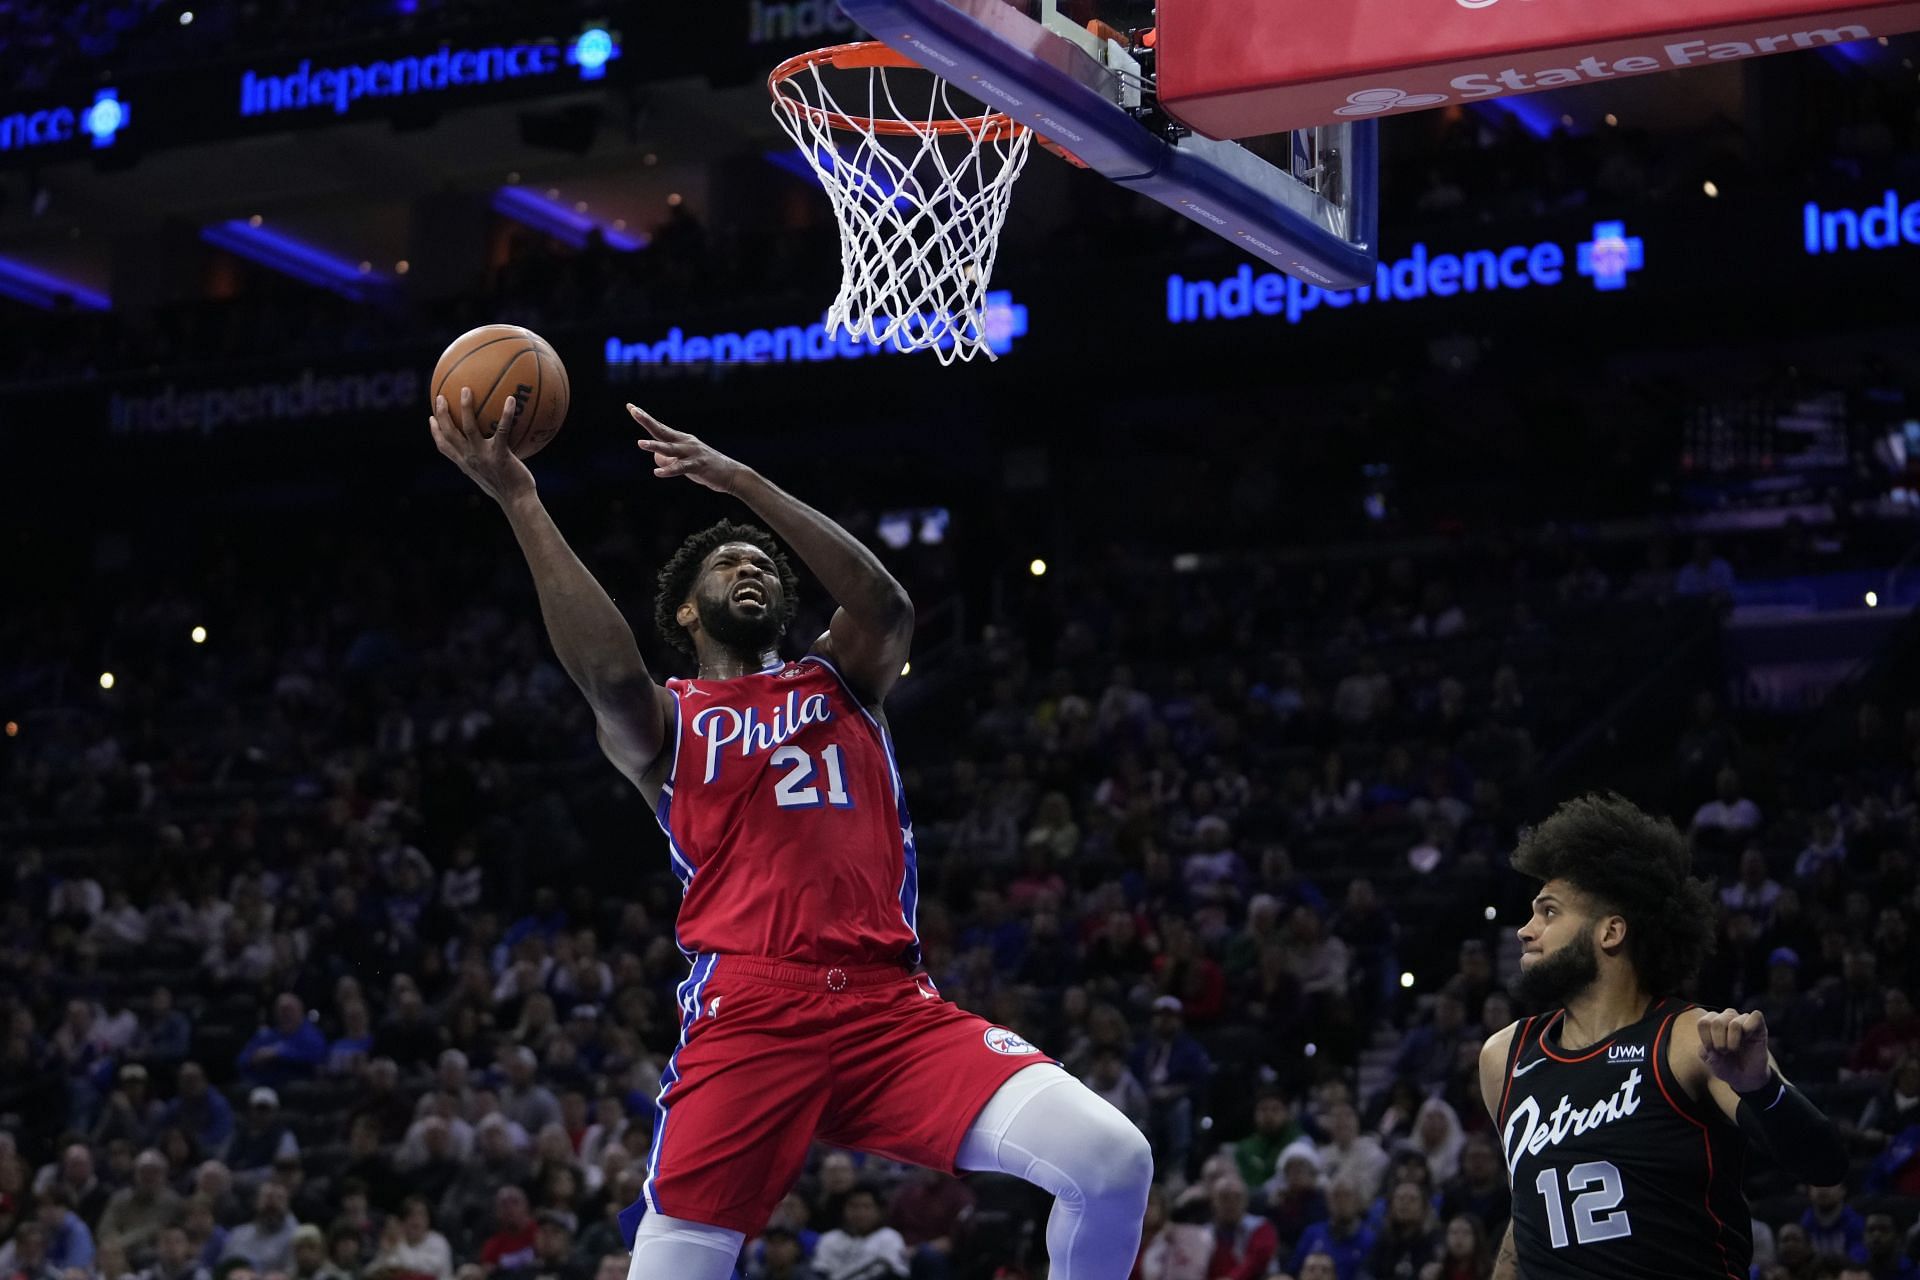 Joel Embiid is the frontrunner to repeat as NBA MVP and scoring champion